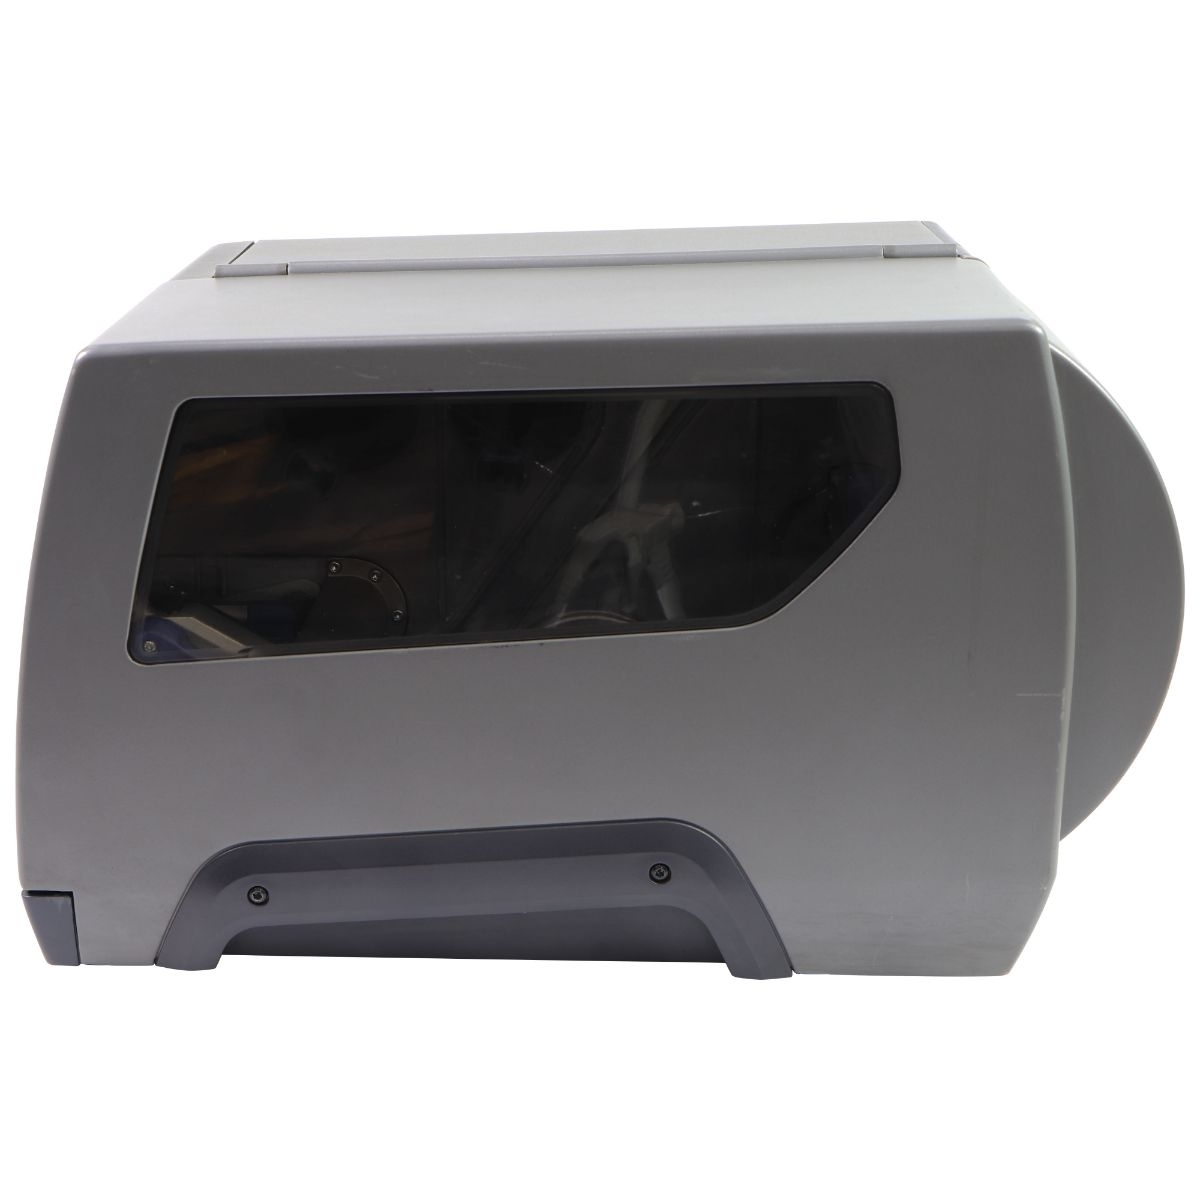 Intermac PM43 Wi-Fi Thermal Label Printer (No Power Cable) PM43A0100000020